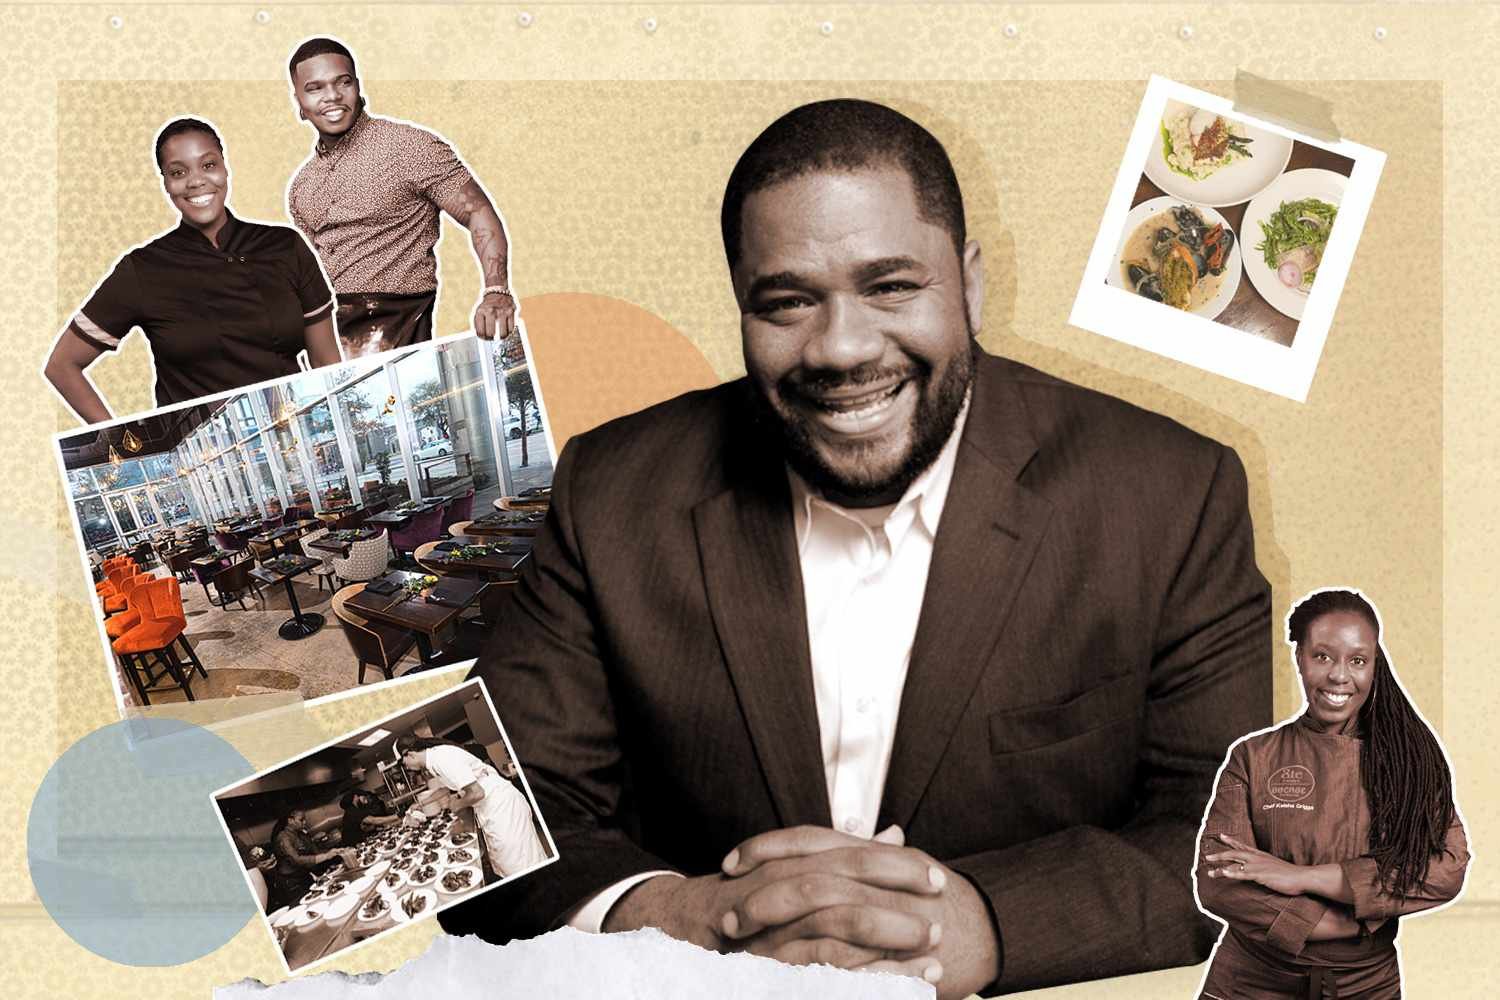 With “Black Chef Table” Marcus Davis Is Providing Access and Opportunity